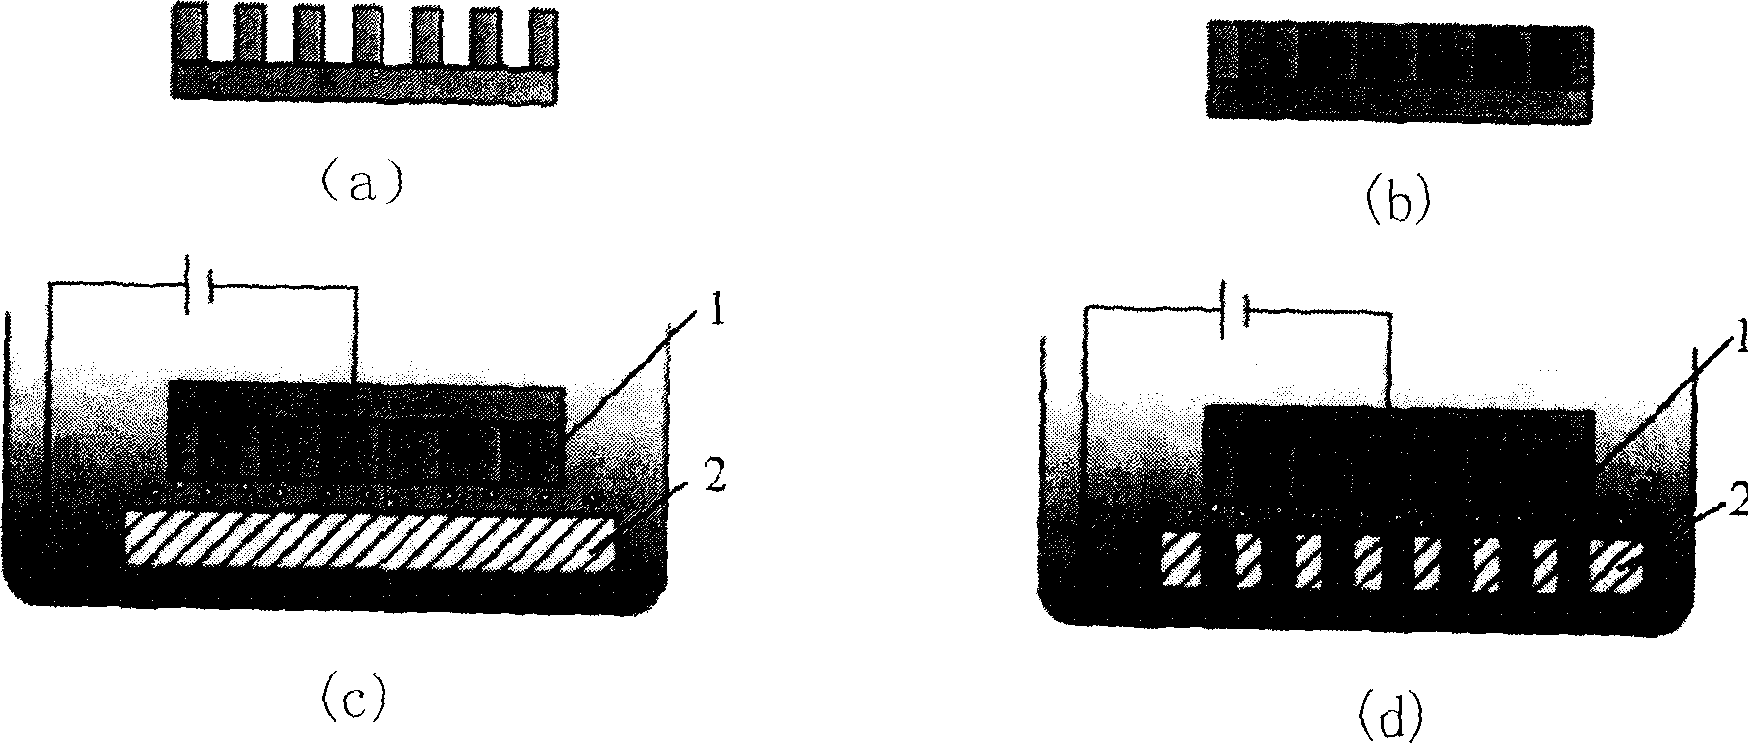 Electrochemical machining process for array micro type hole